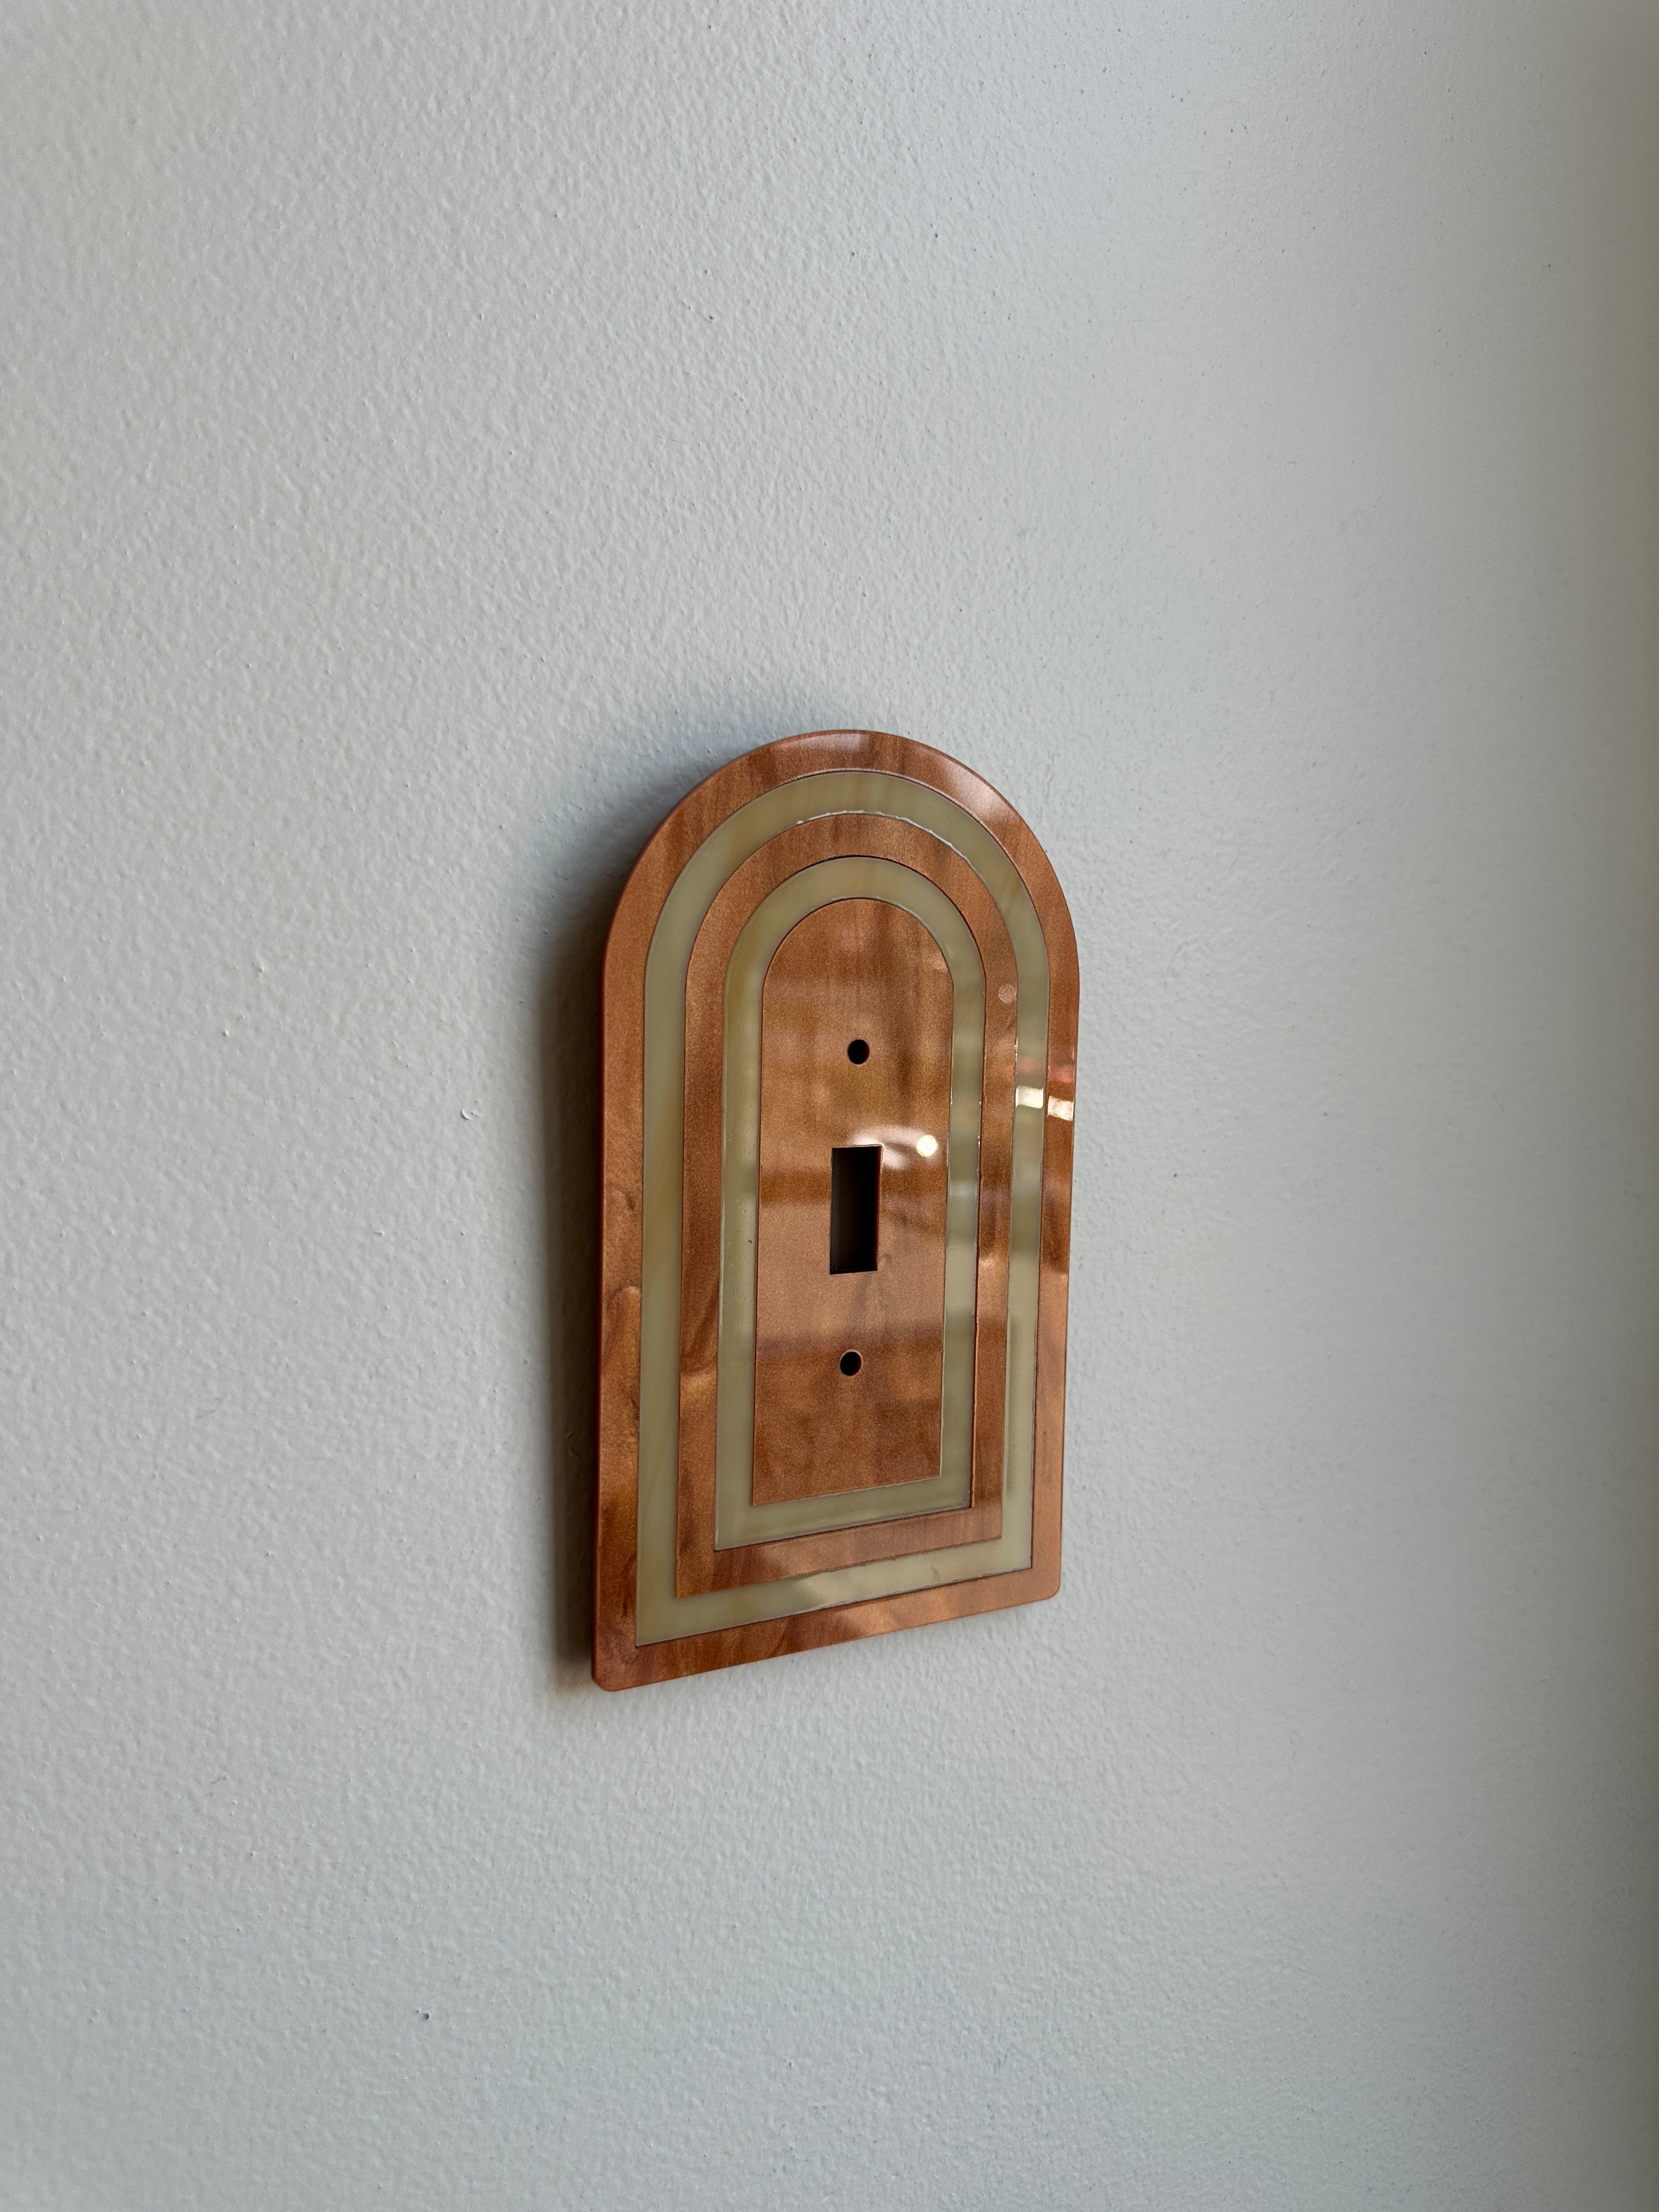 Acoustic Wave Layered Archway Light Switch Sample Sale